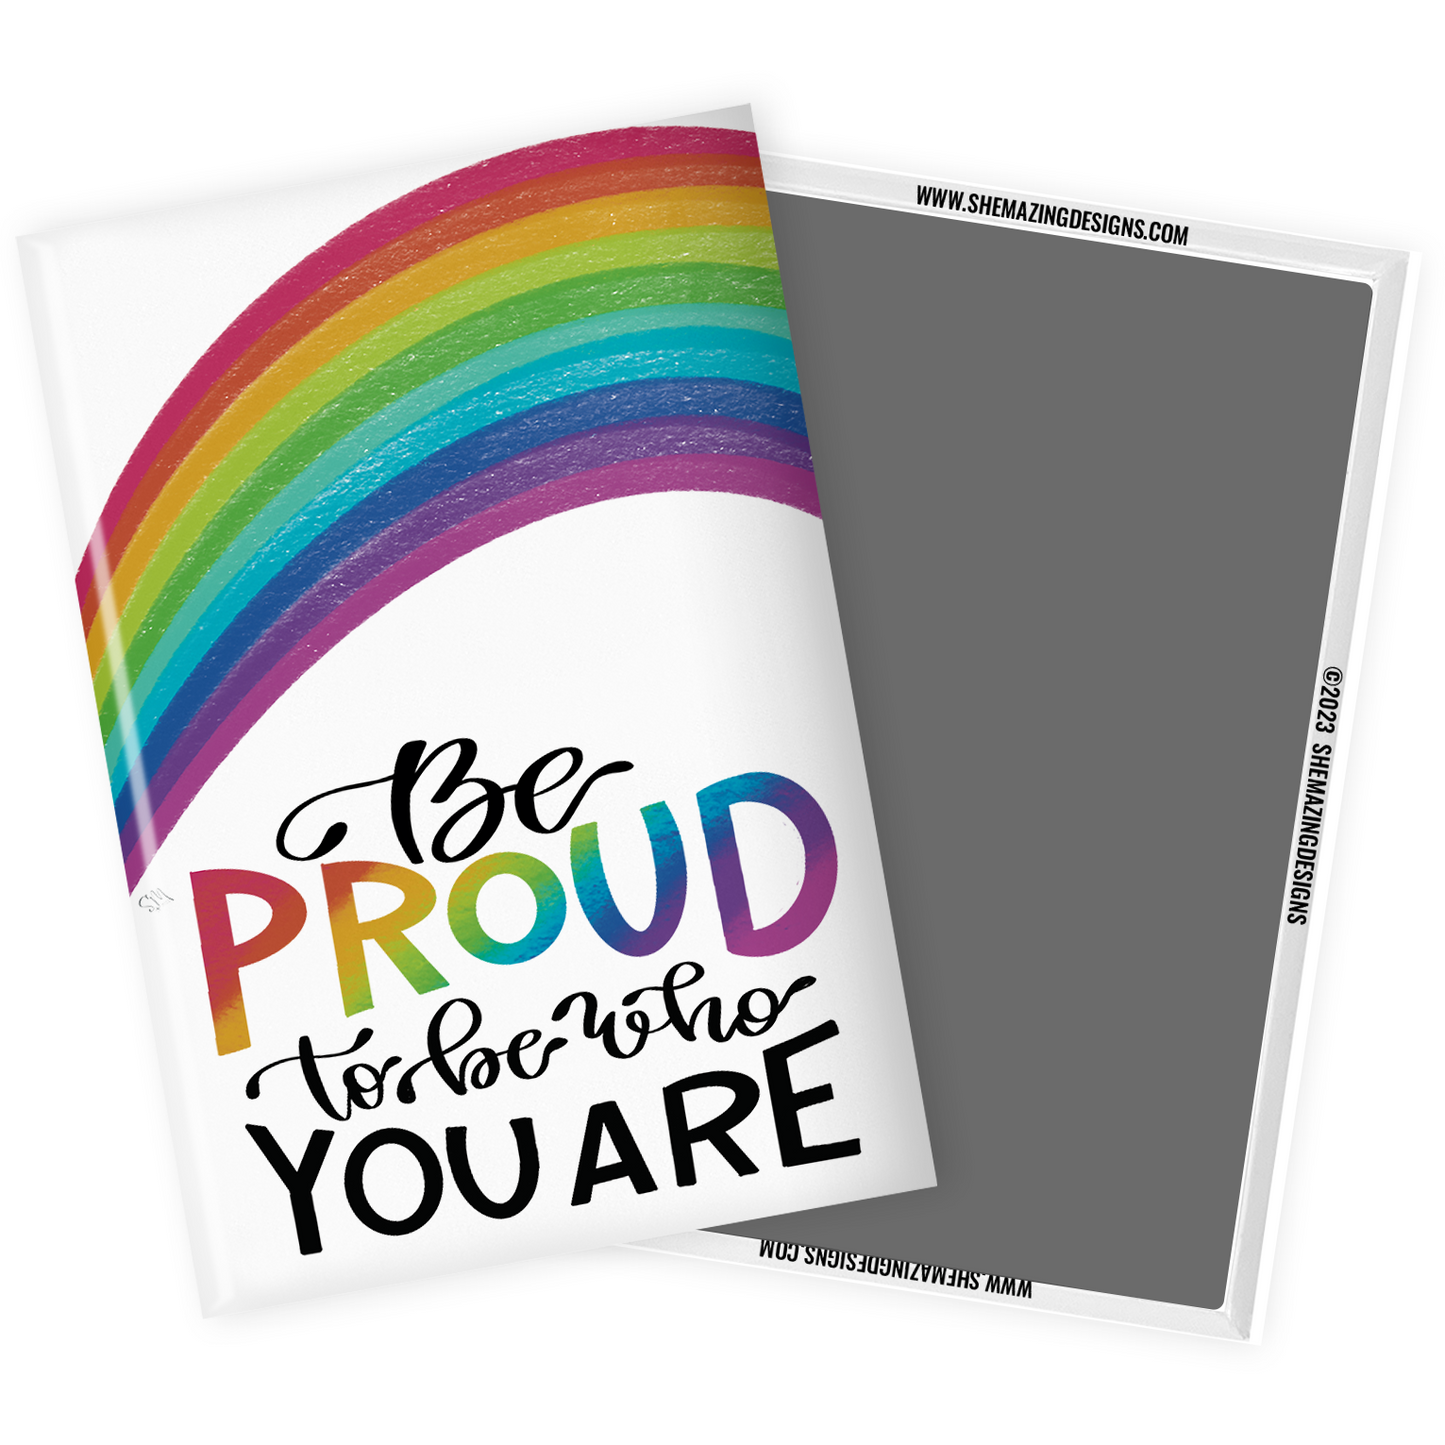 Be Proud to Be Who You Are - Pride Fridge Magnet